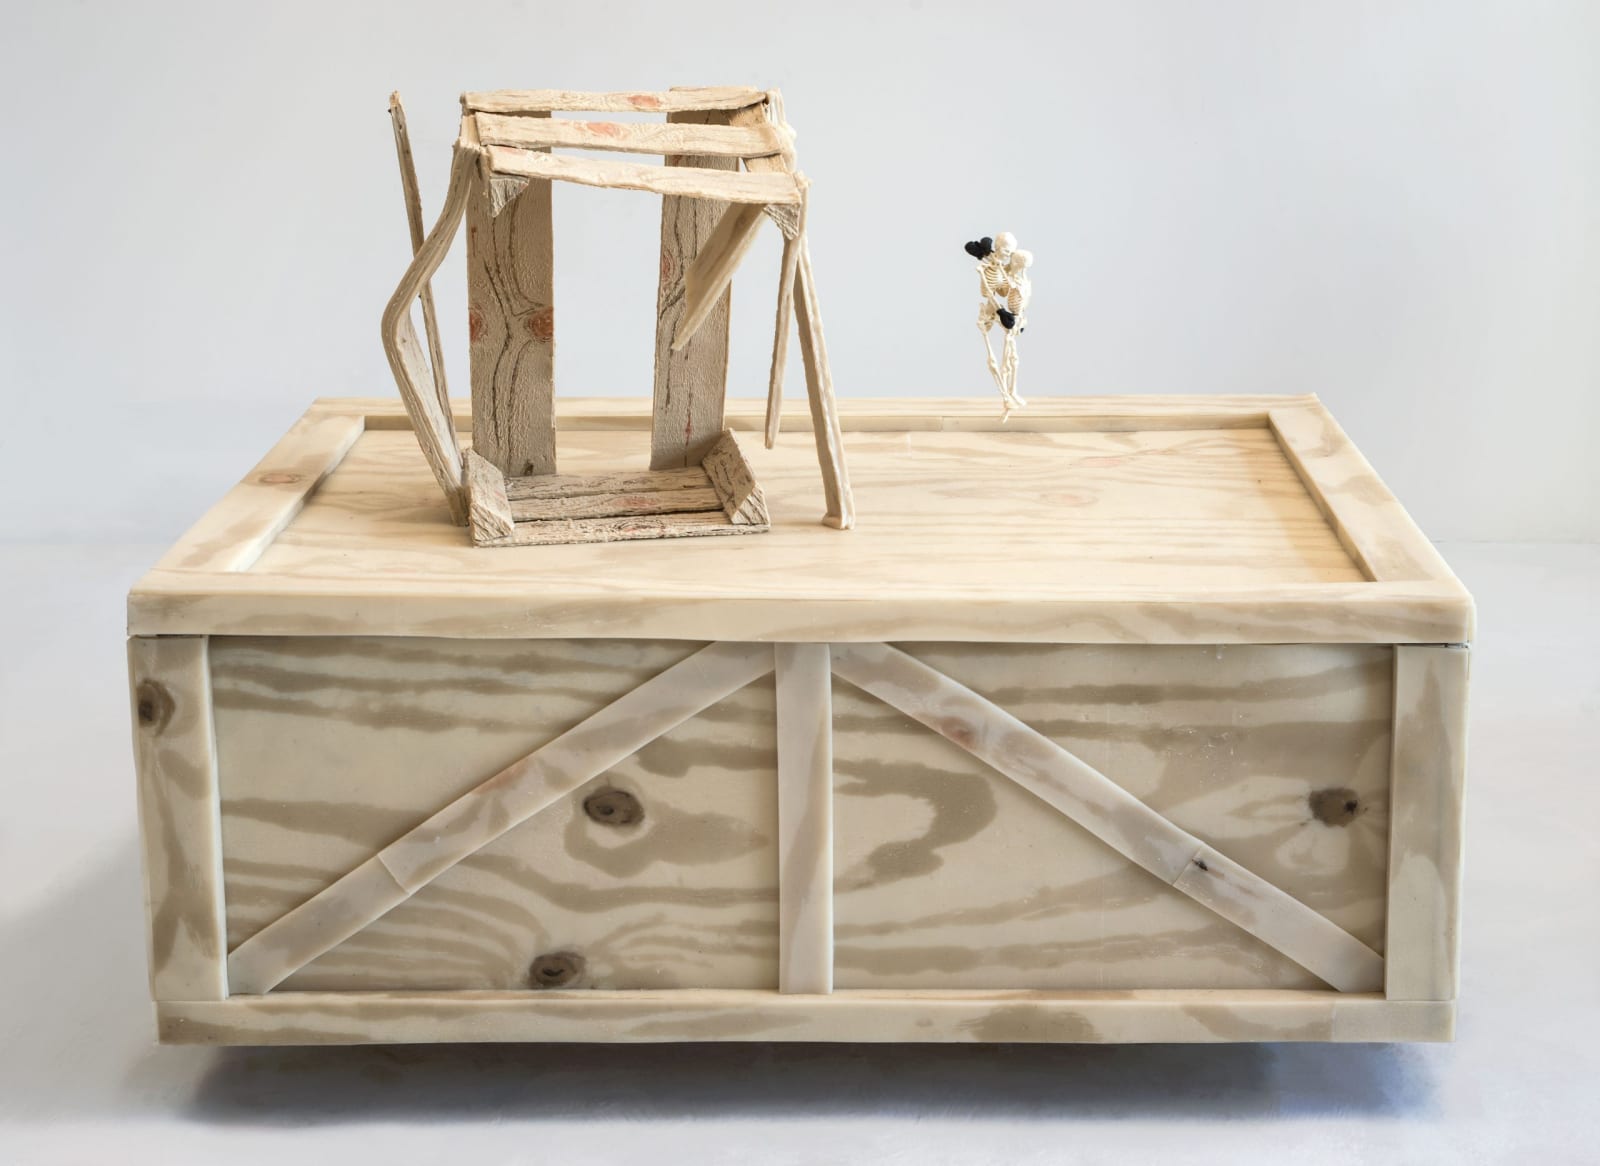 Jeanne Silverthorne, Two Crates with Hanging Skeletons, 2019